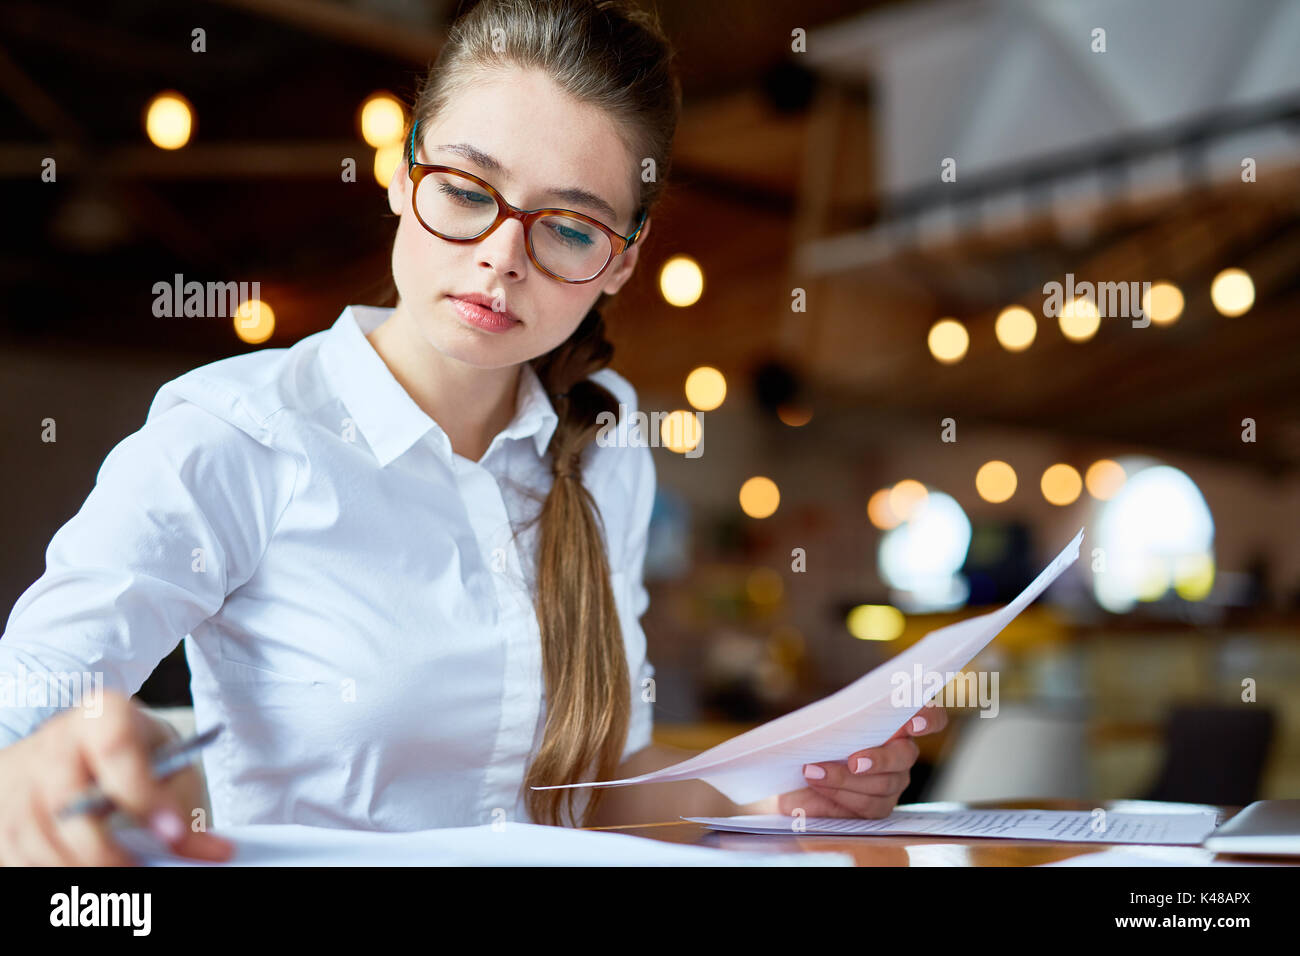 Busy White Collar Worker at Coffeehouse Stock Photo